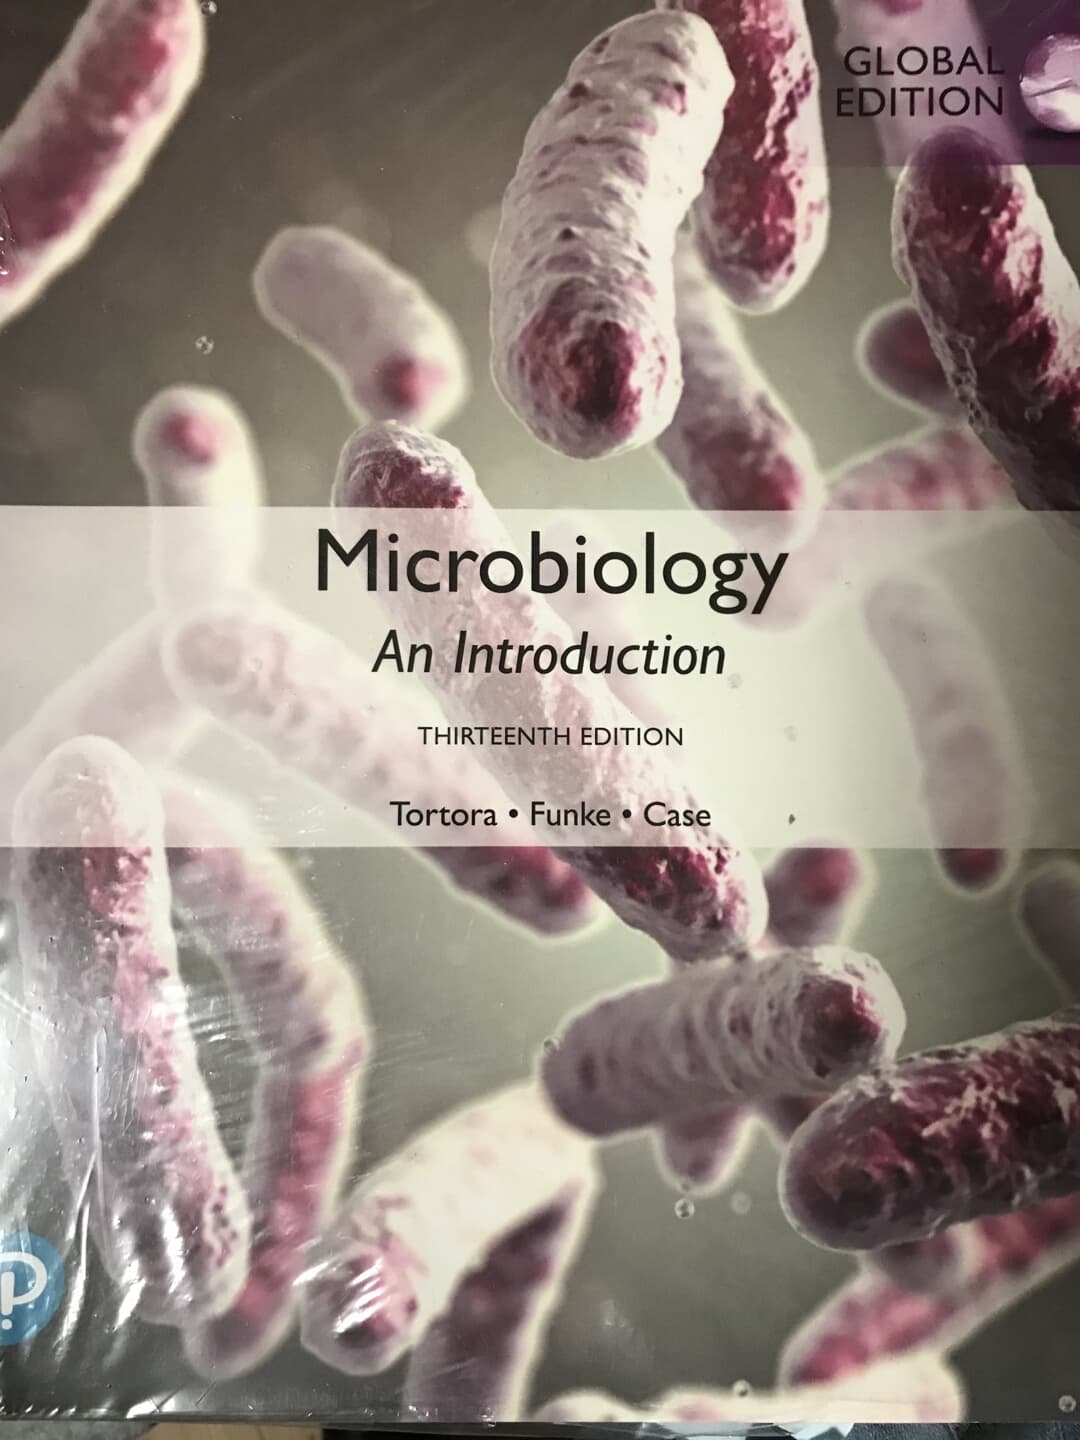 Microbiology an introduction thirteenth edition(global edition)